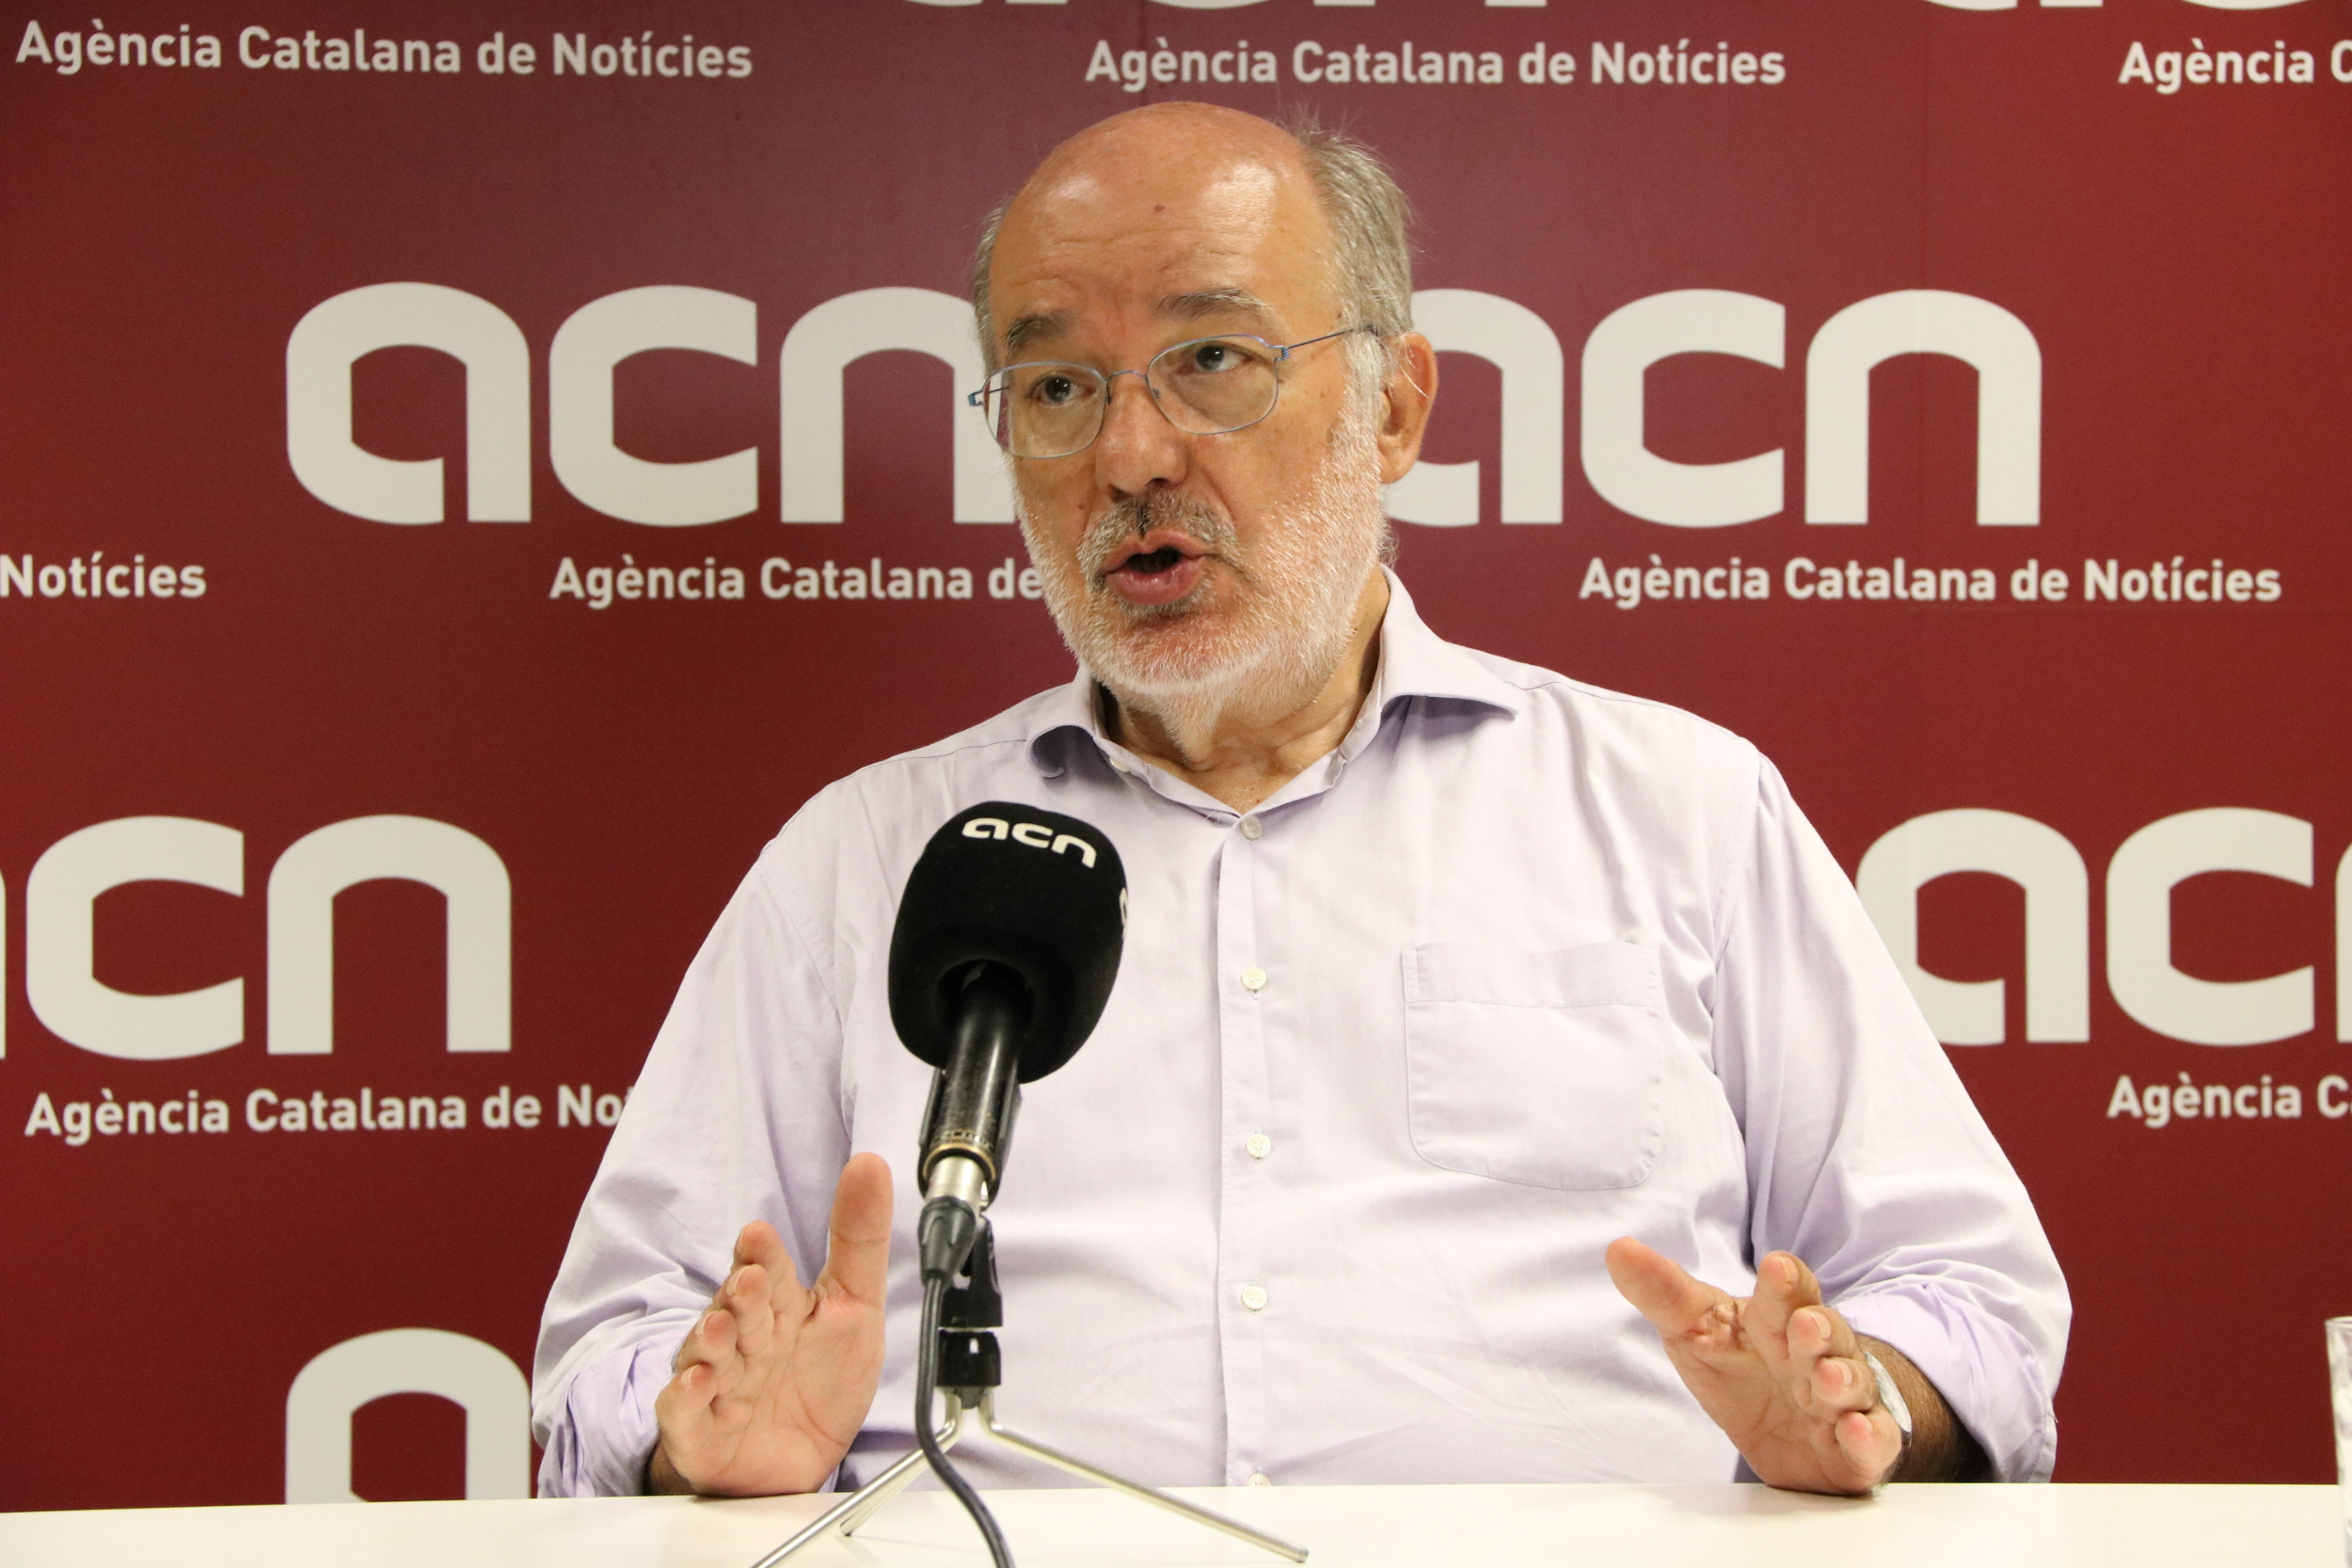 The MEP Josep Maria Terricabras during the interview with Catalan News (by Alan Ruiz)